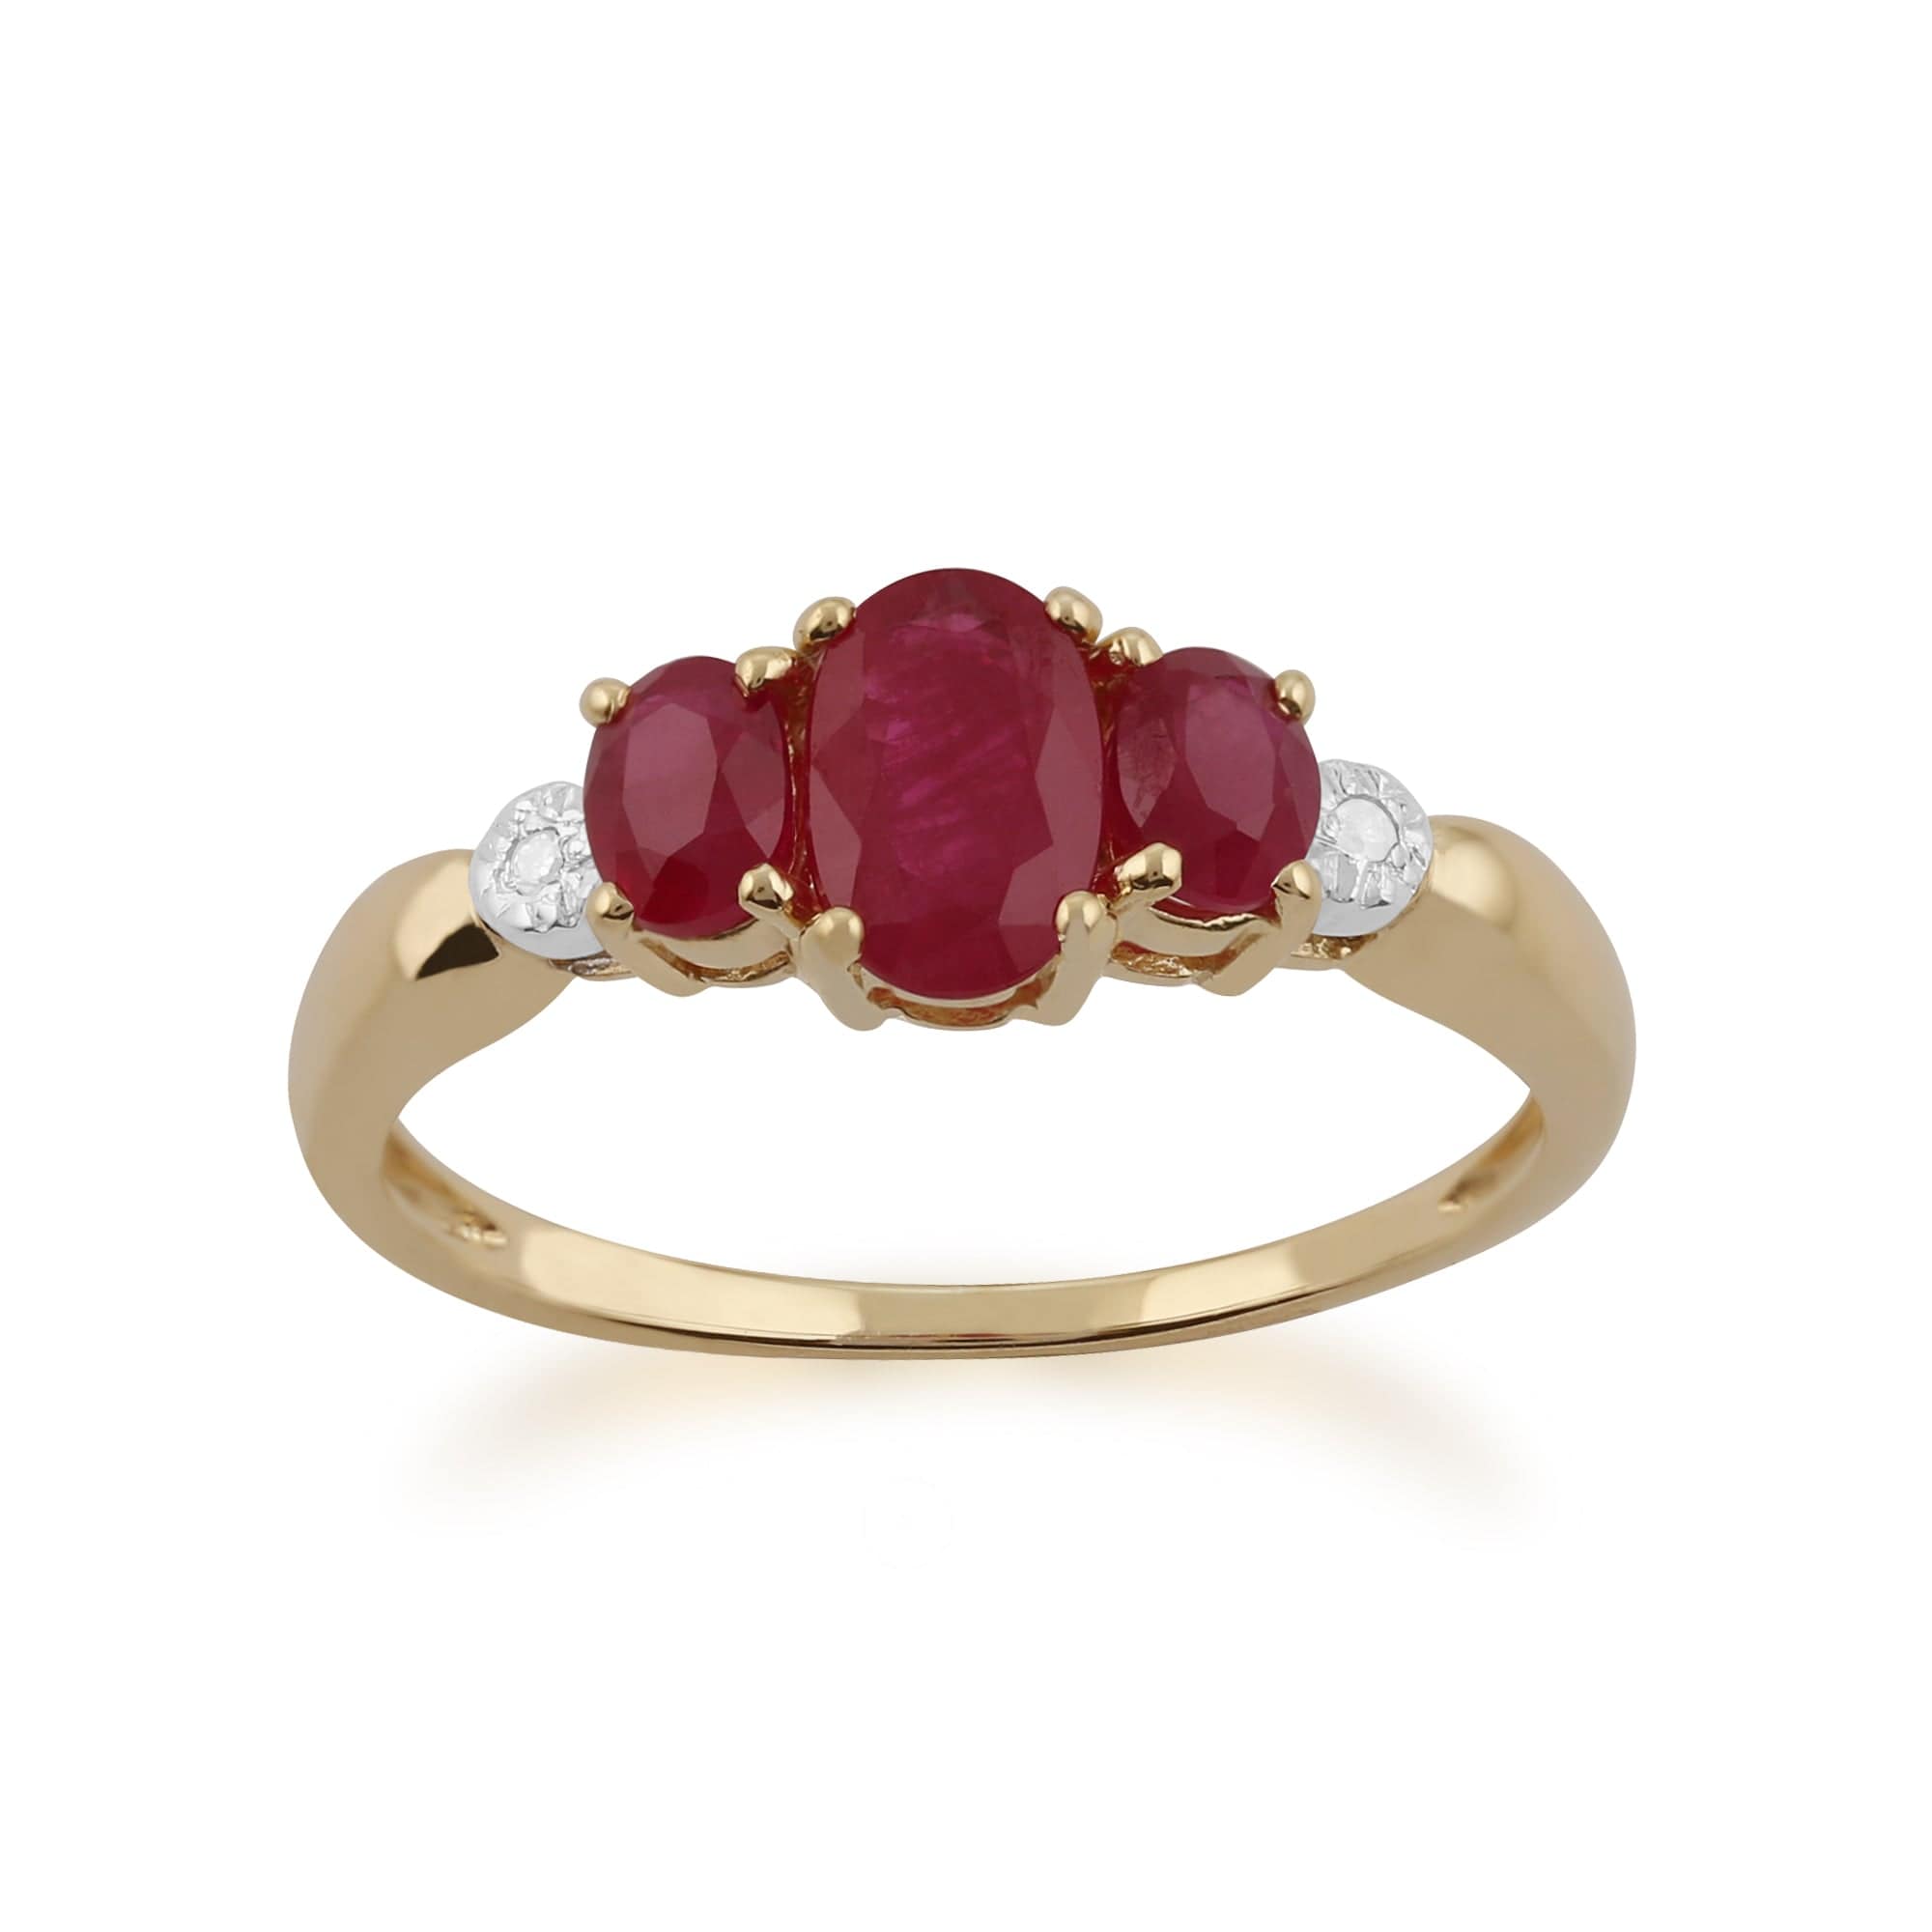 Classic Oval Ruby & Diamond Trilogy Ring in 9ct Yellow Gold - Gemondo